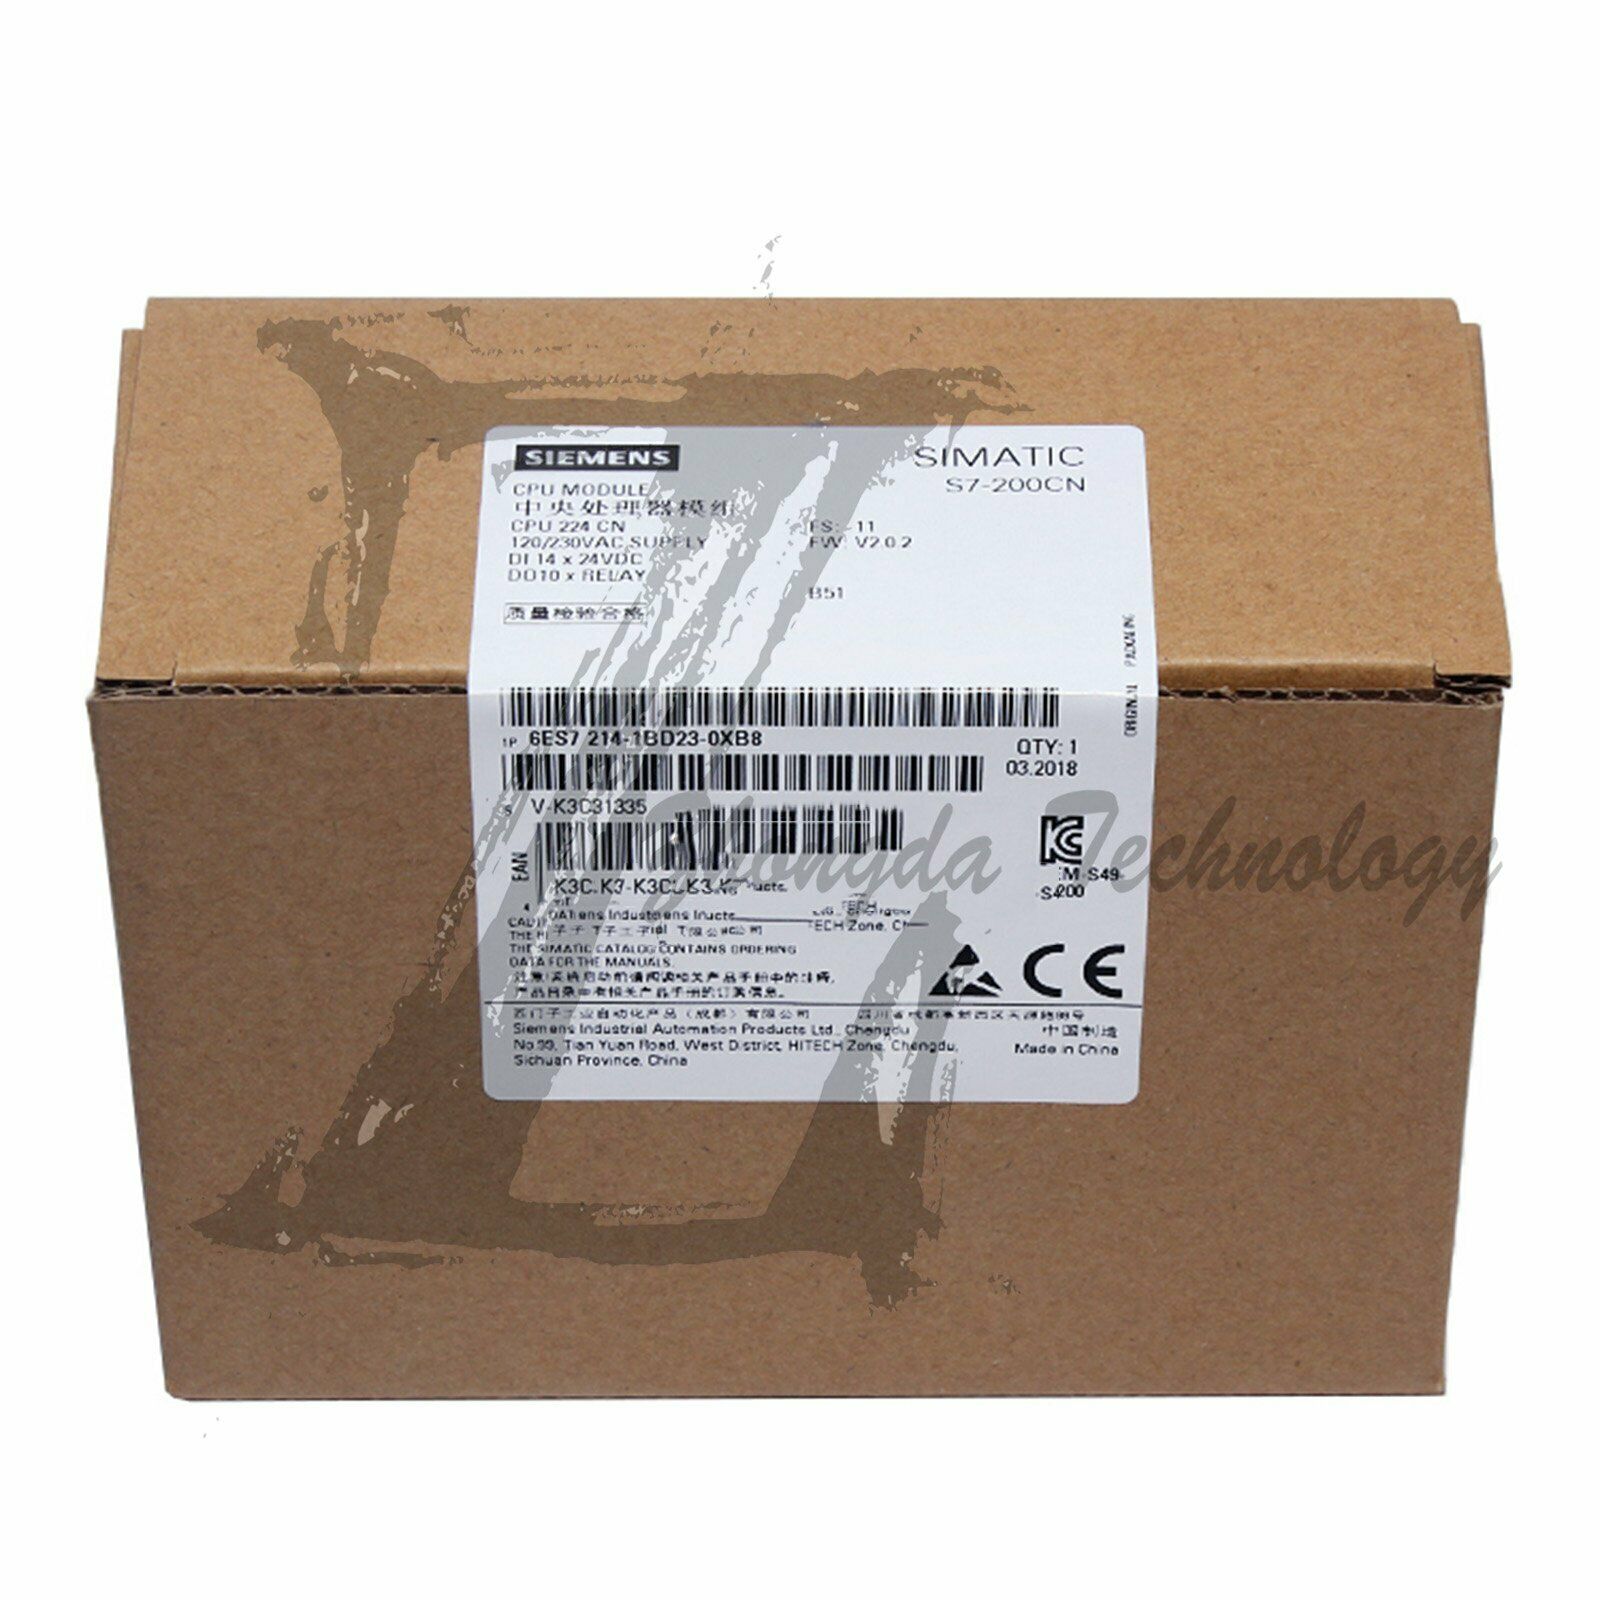 1PC NEW IN BOX SIEMENS PLC 6ES7 214-1BD23-0XB8 One year warrant KOEED 101-200, 90%, import_2020_10_10_031751, Other, Siemens